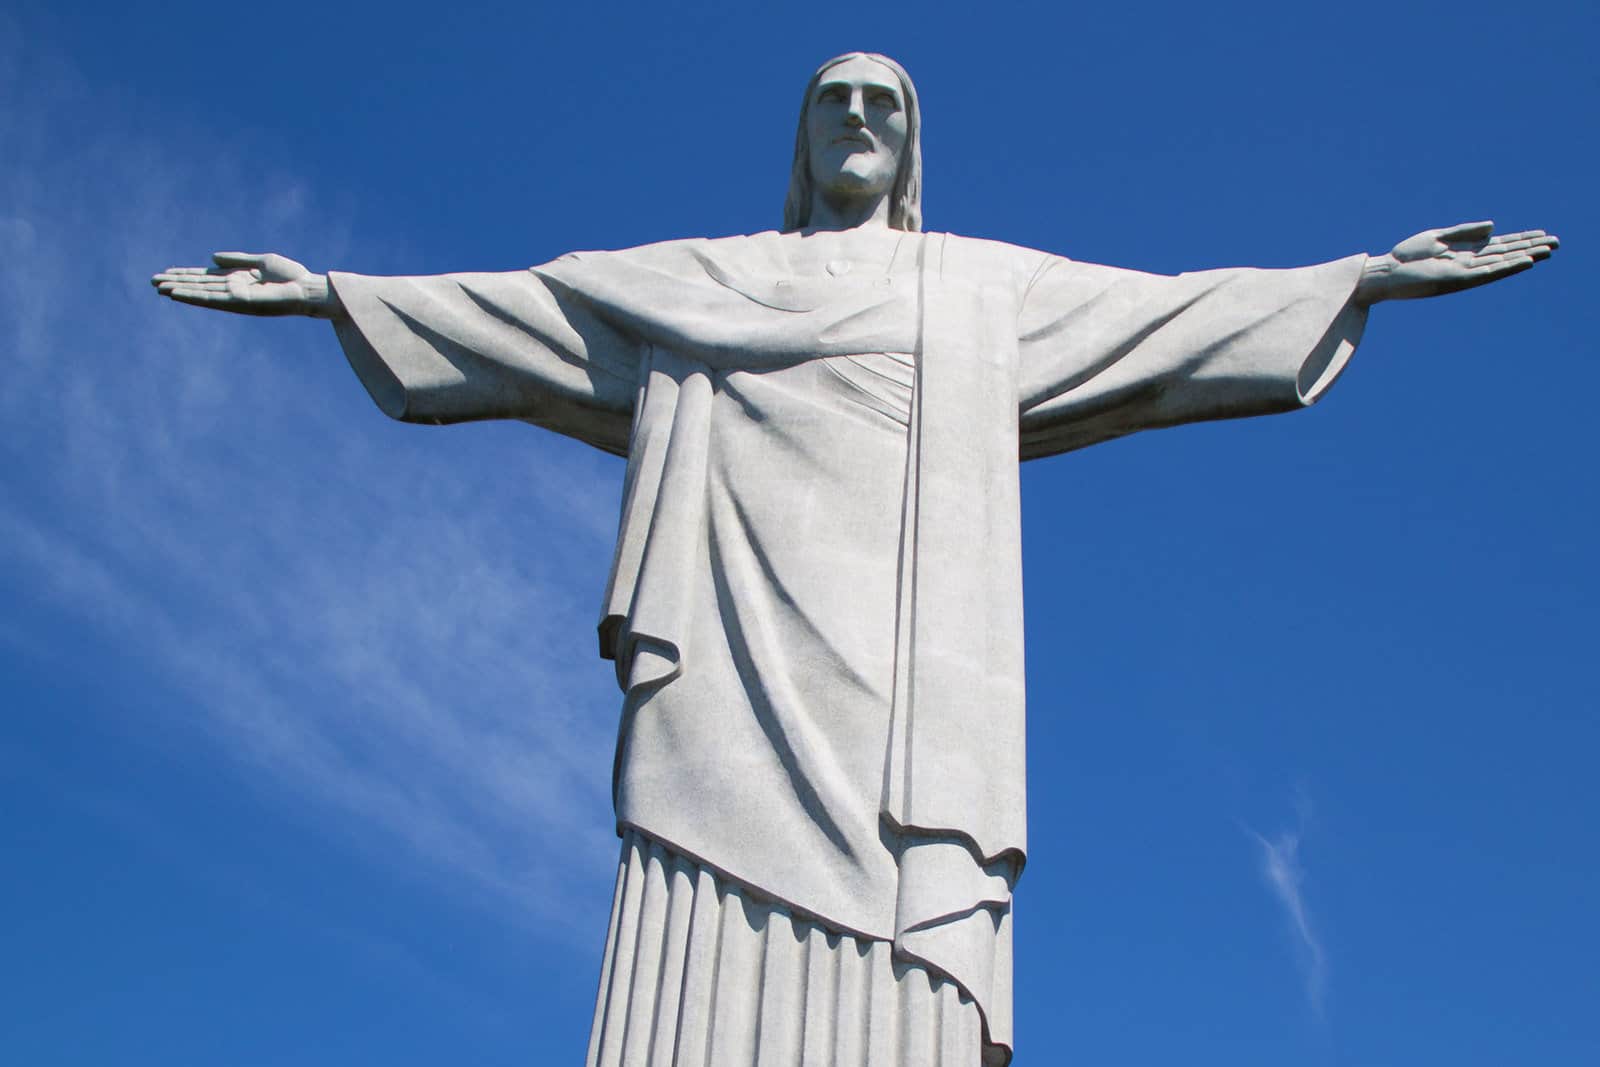 Brazil's Christ the Redeemer Statue is shown from below against a blue sky.